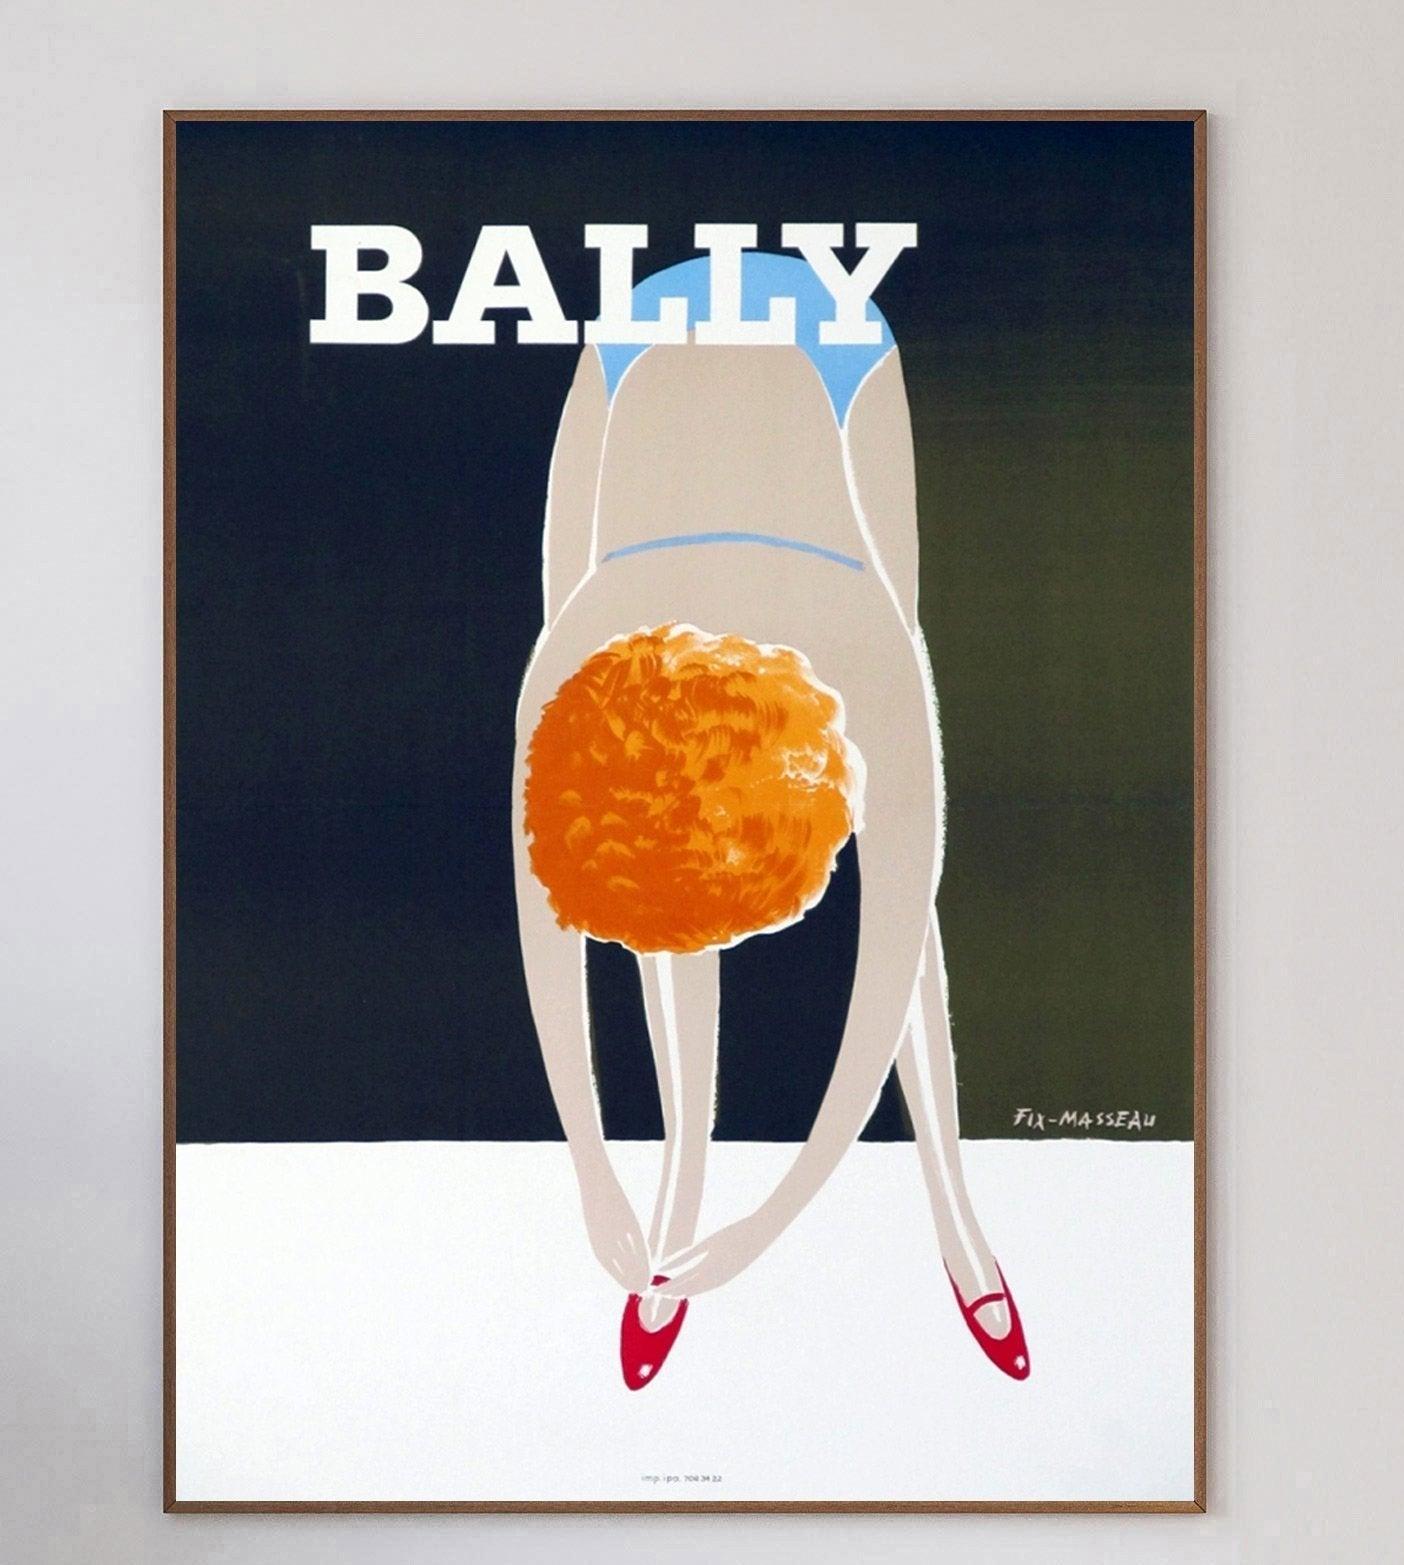 Beautifully designed poster from 1980 advertising the luxury Swiss shoe brand Bally. With artwork from French graphic designer and poster artist Fix-Masseau, known for his collaborations with the Venice Simplon Orient-Express.

This piece known as